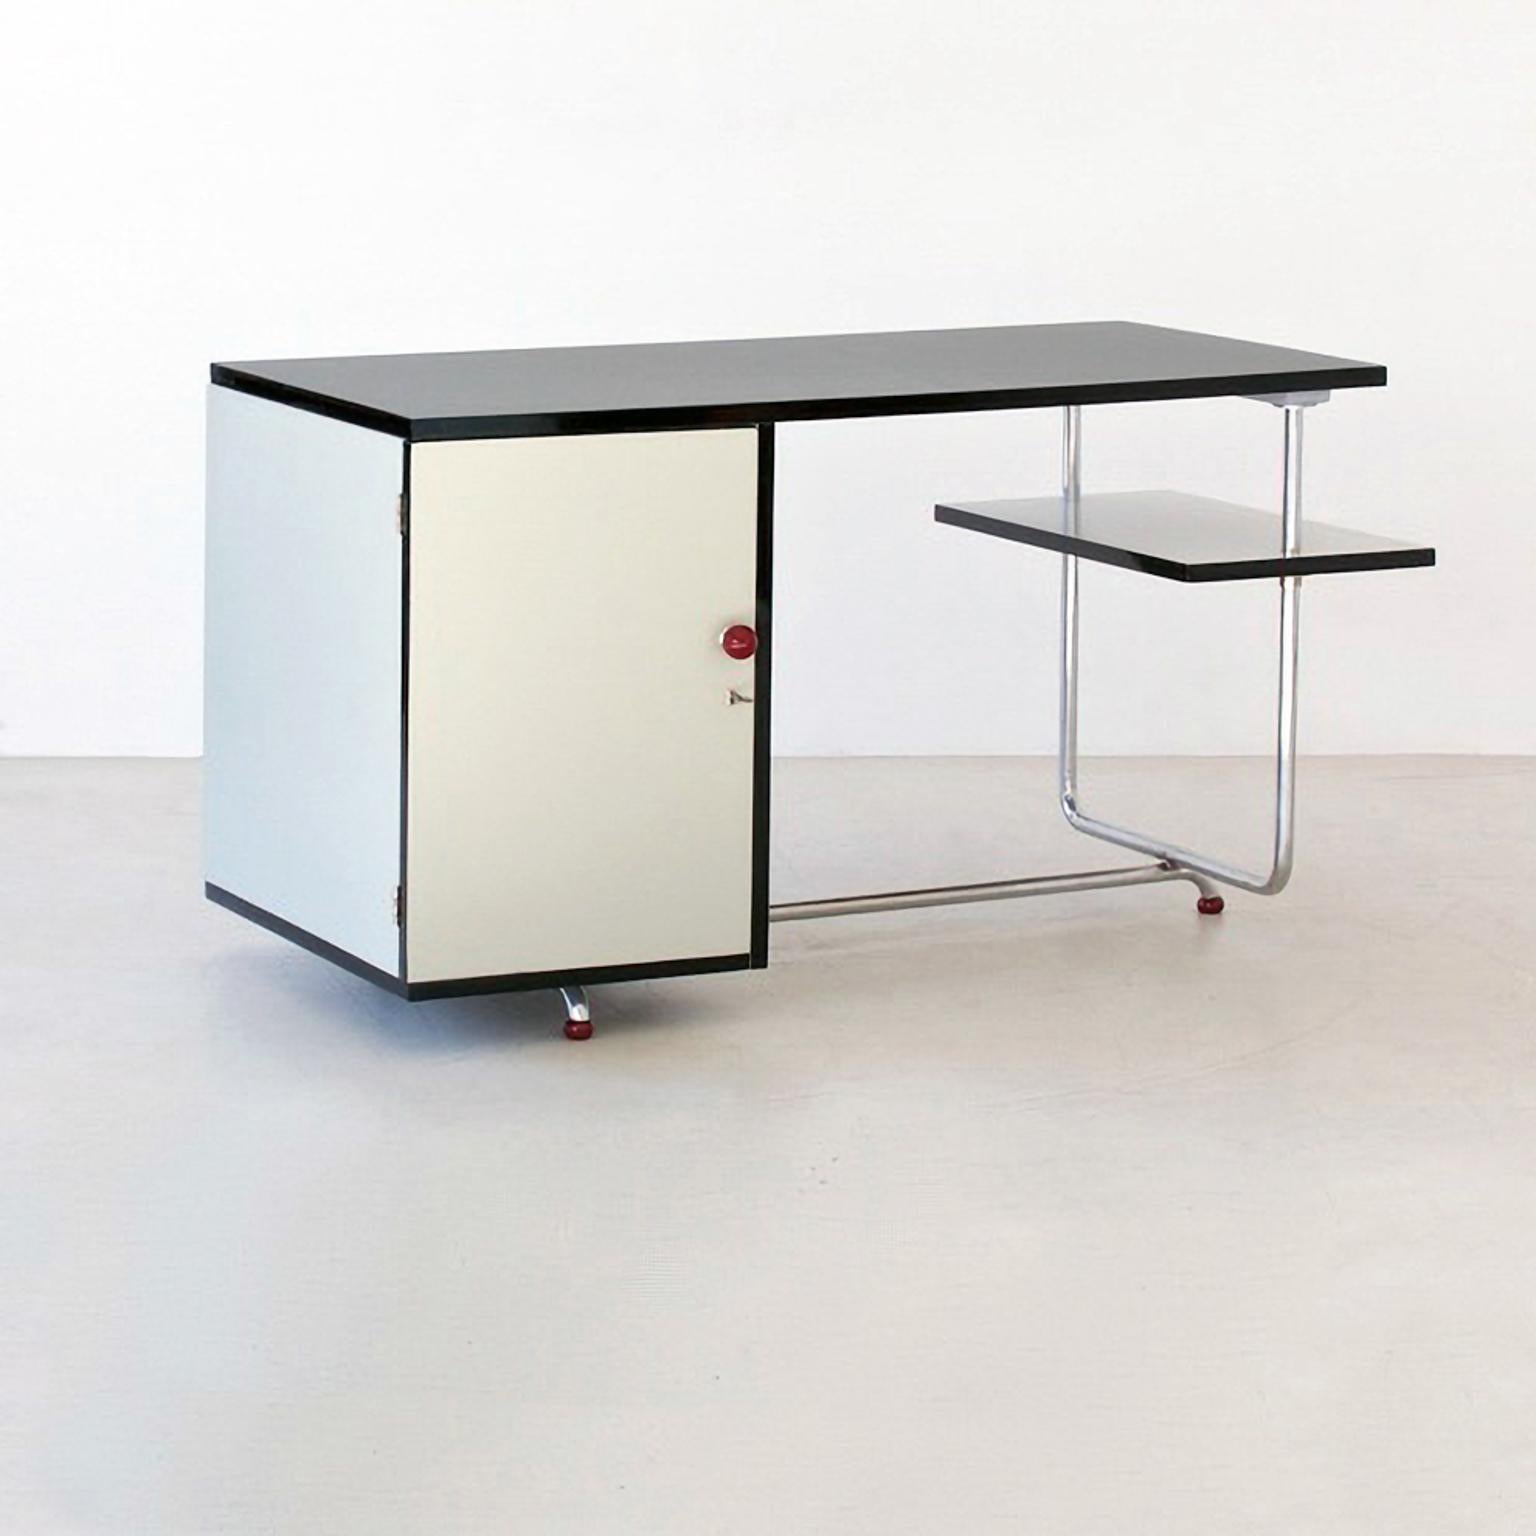 Modernist Tubular Steel Desk by Jindrich Halabala, Chromed Metal, Lacquered Wood In Good Condition For Sale In Berlin, DE